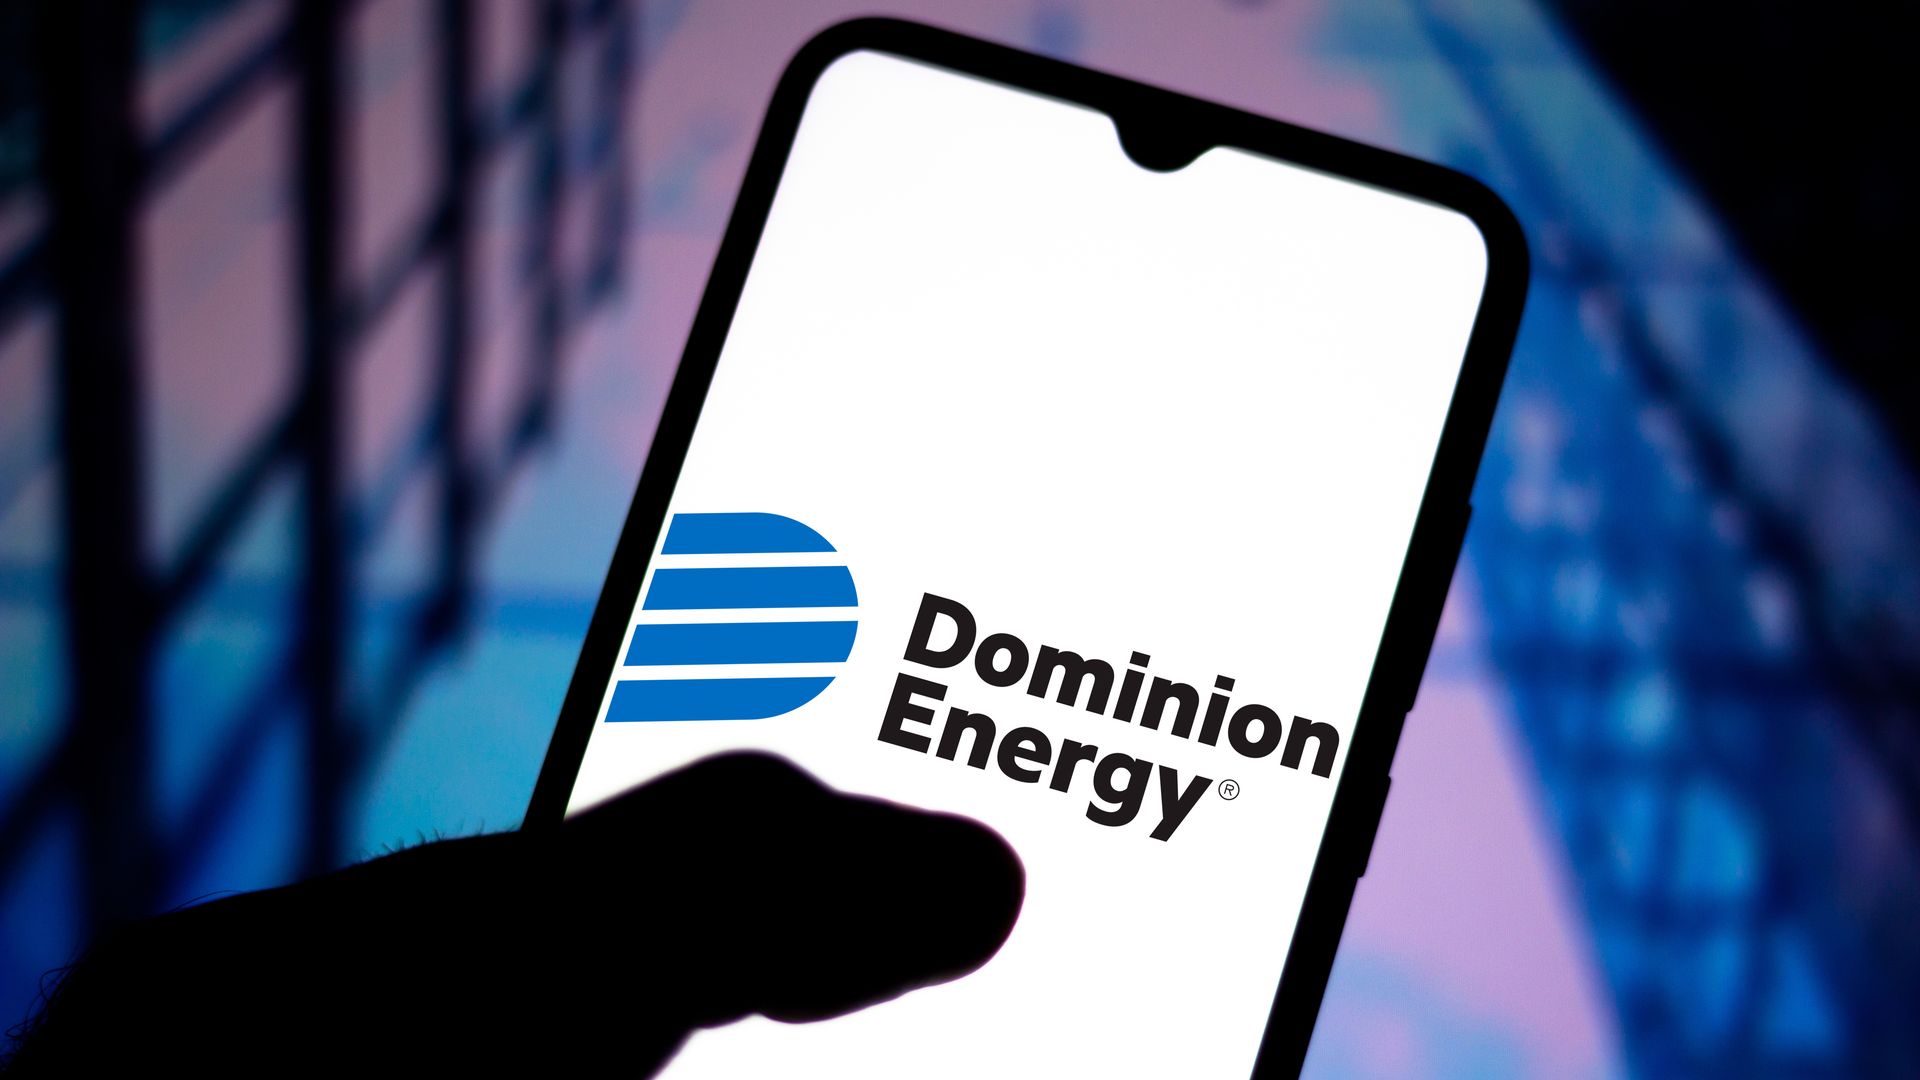 Dominion Energy logo seen displayed on a smartphone